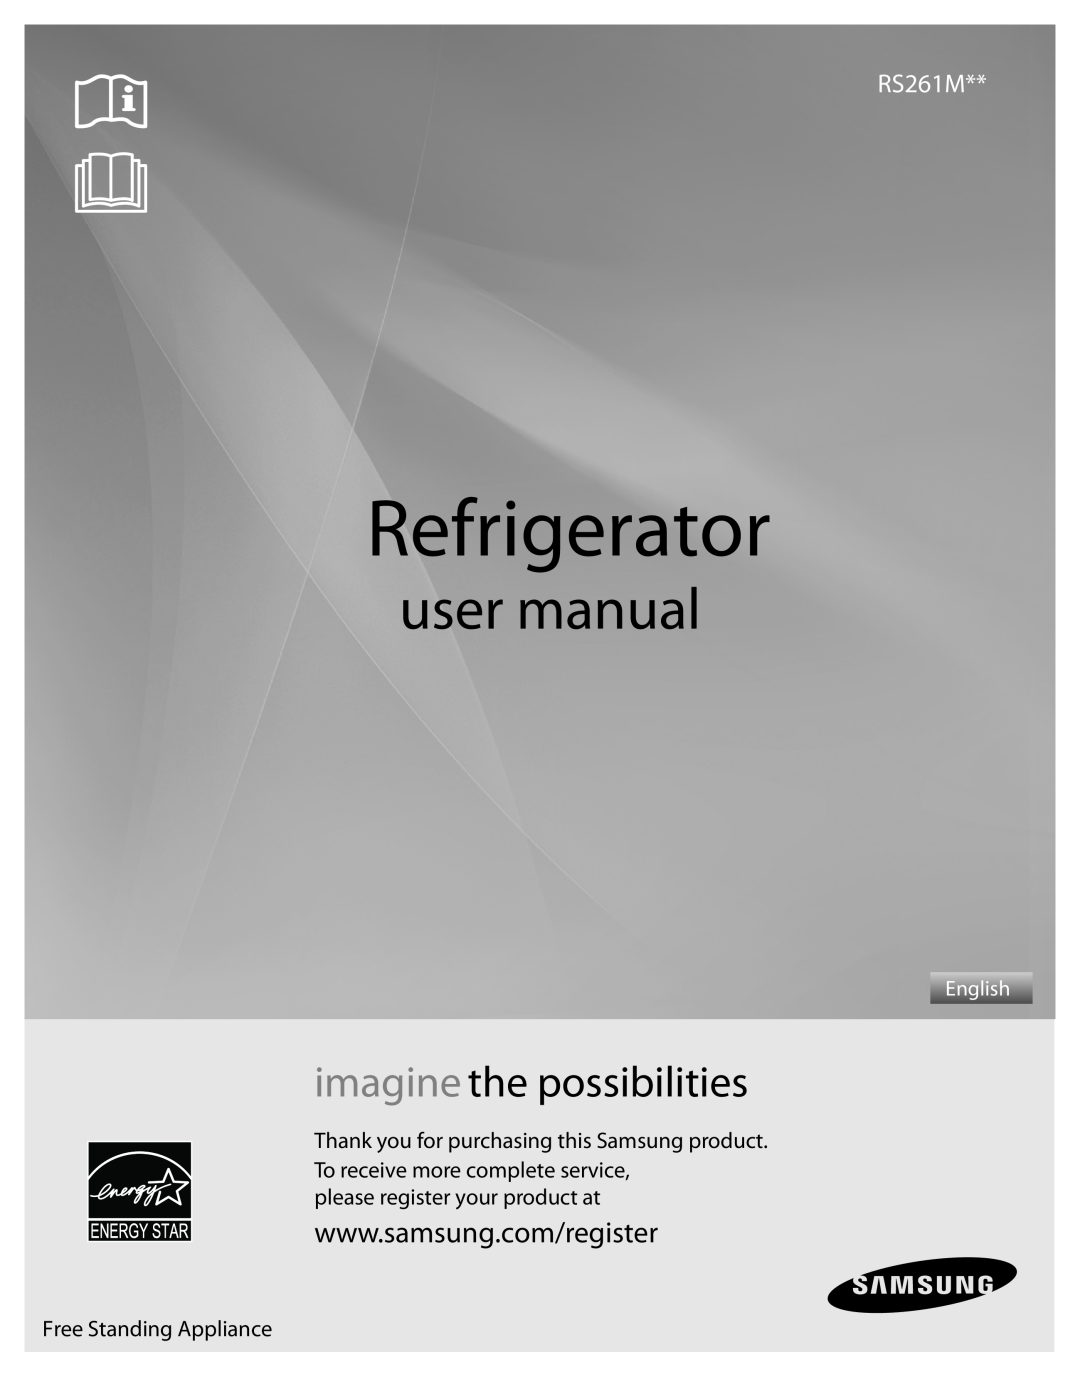 Samsung RS261MDWP, RS261MDBP user manual Refrigerator, imagine the possibilities, please register your product at, English 